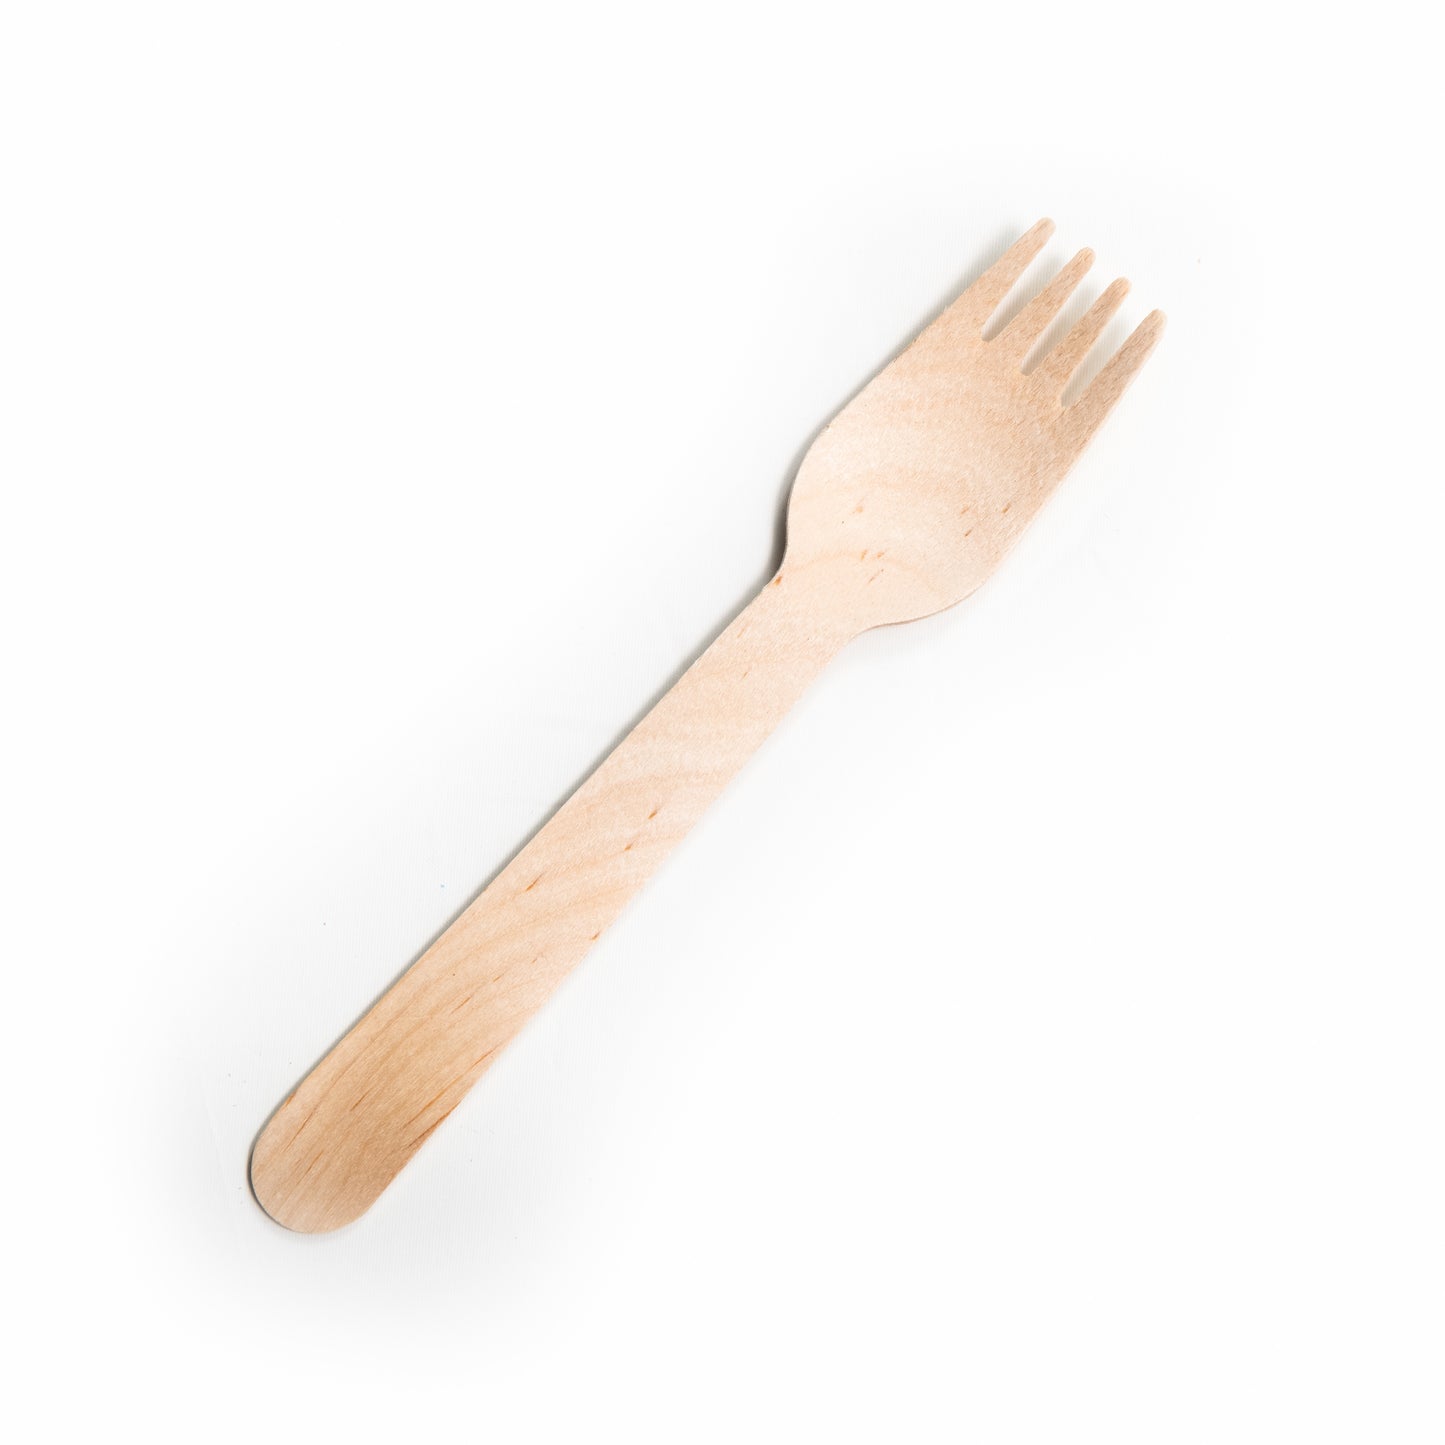 Disposable Birchwood Cutlery - 100 pieces